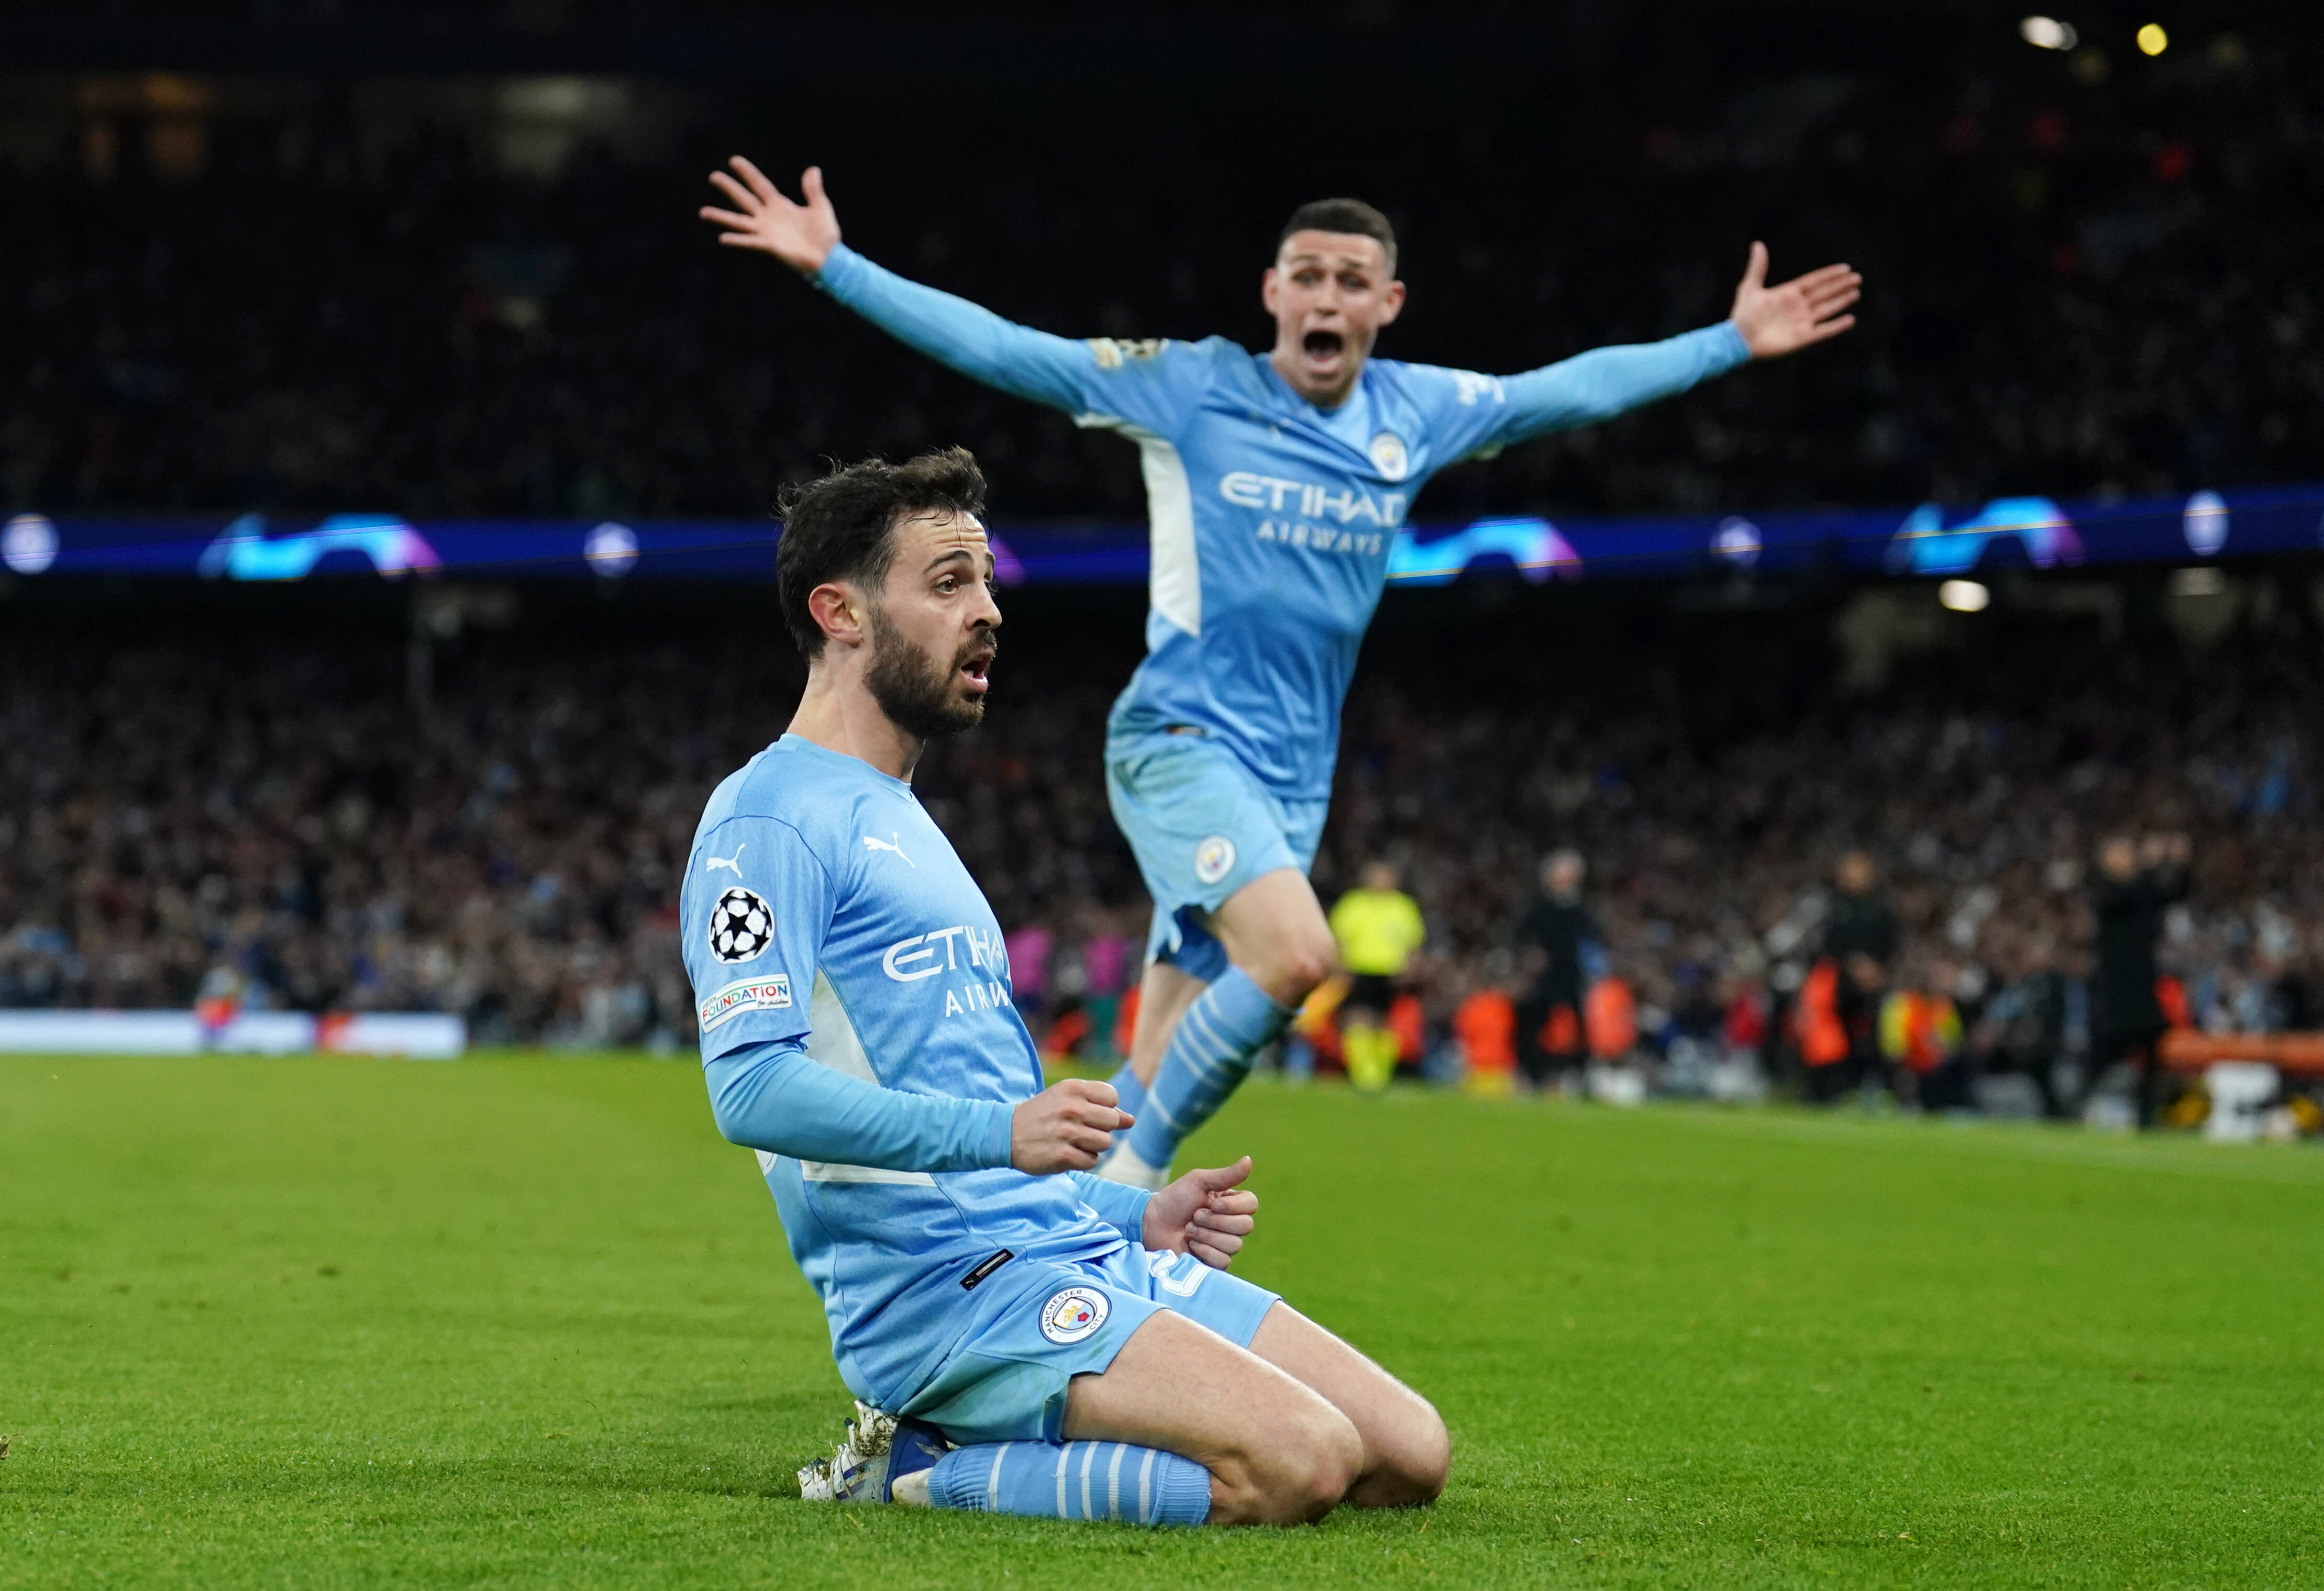 Bernardo Silva scored City's fourth of the night against Real Madrid in the Champions league